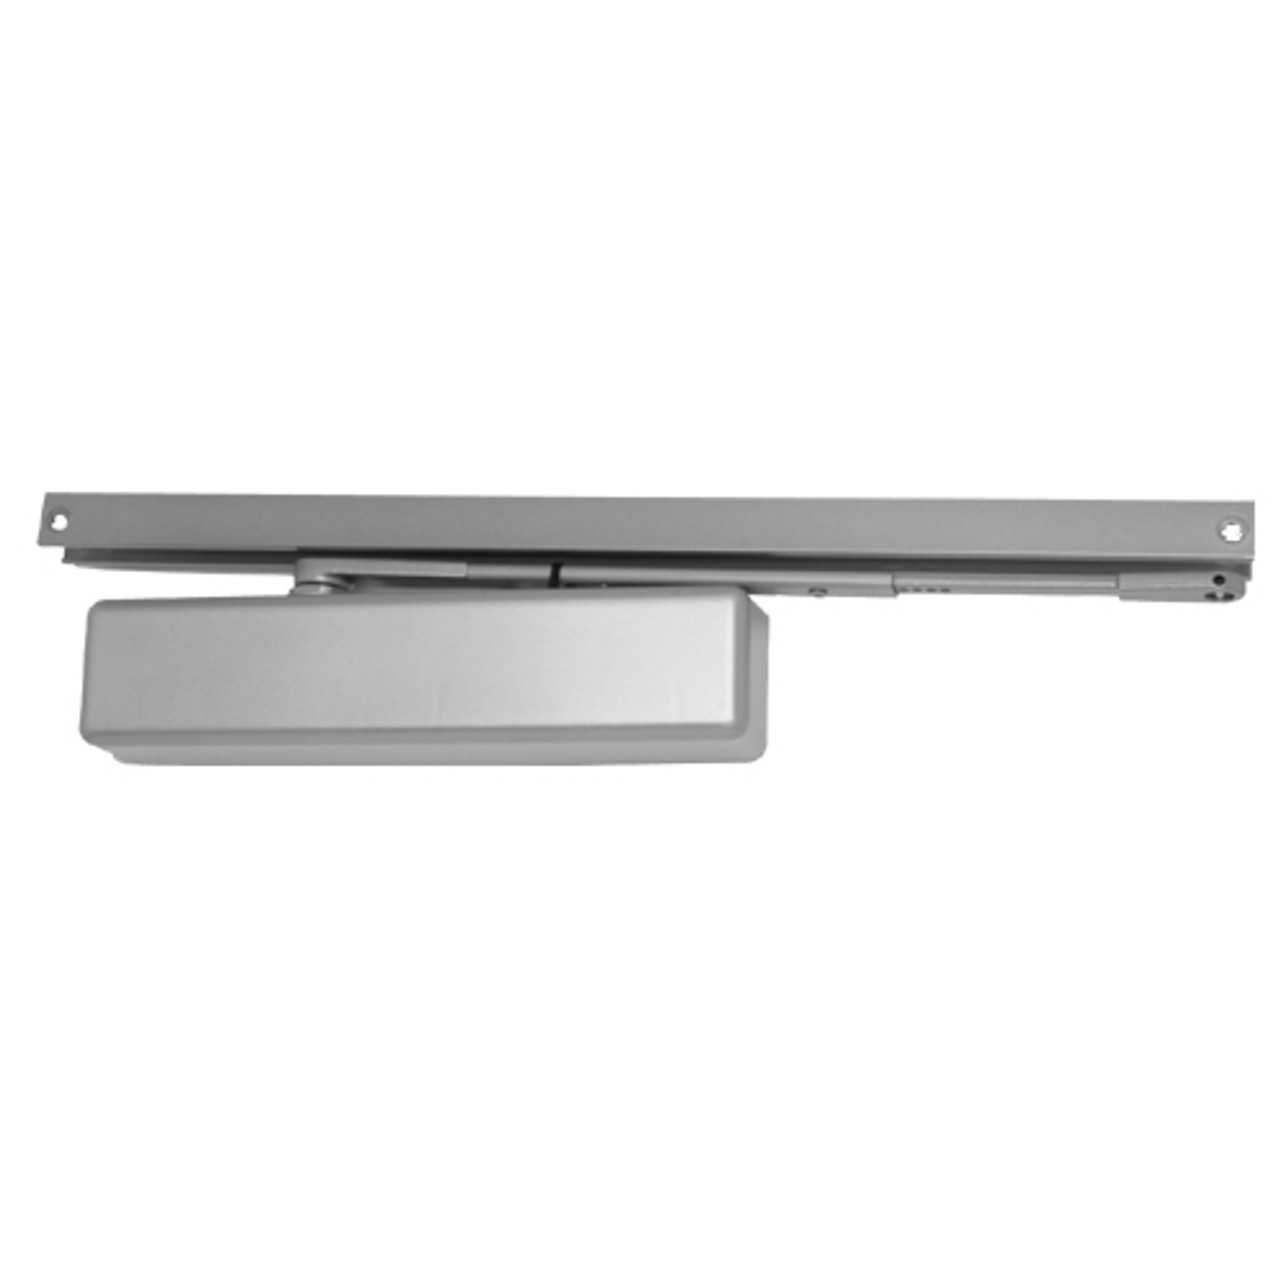 1461T-H-BUMPER-AL-DS LCN Surface Mount Door Closer with Hold Open Track with Bumper in Aluminum Finish